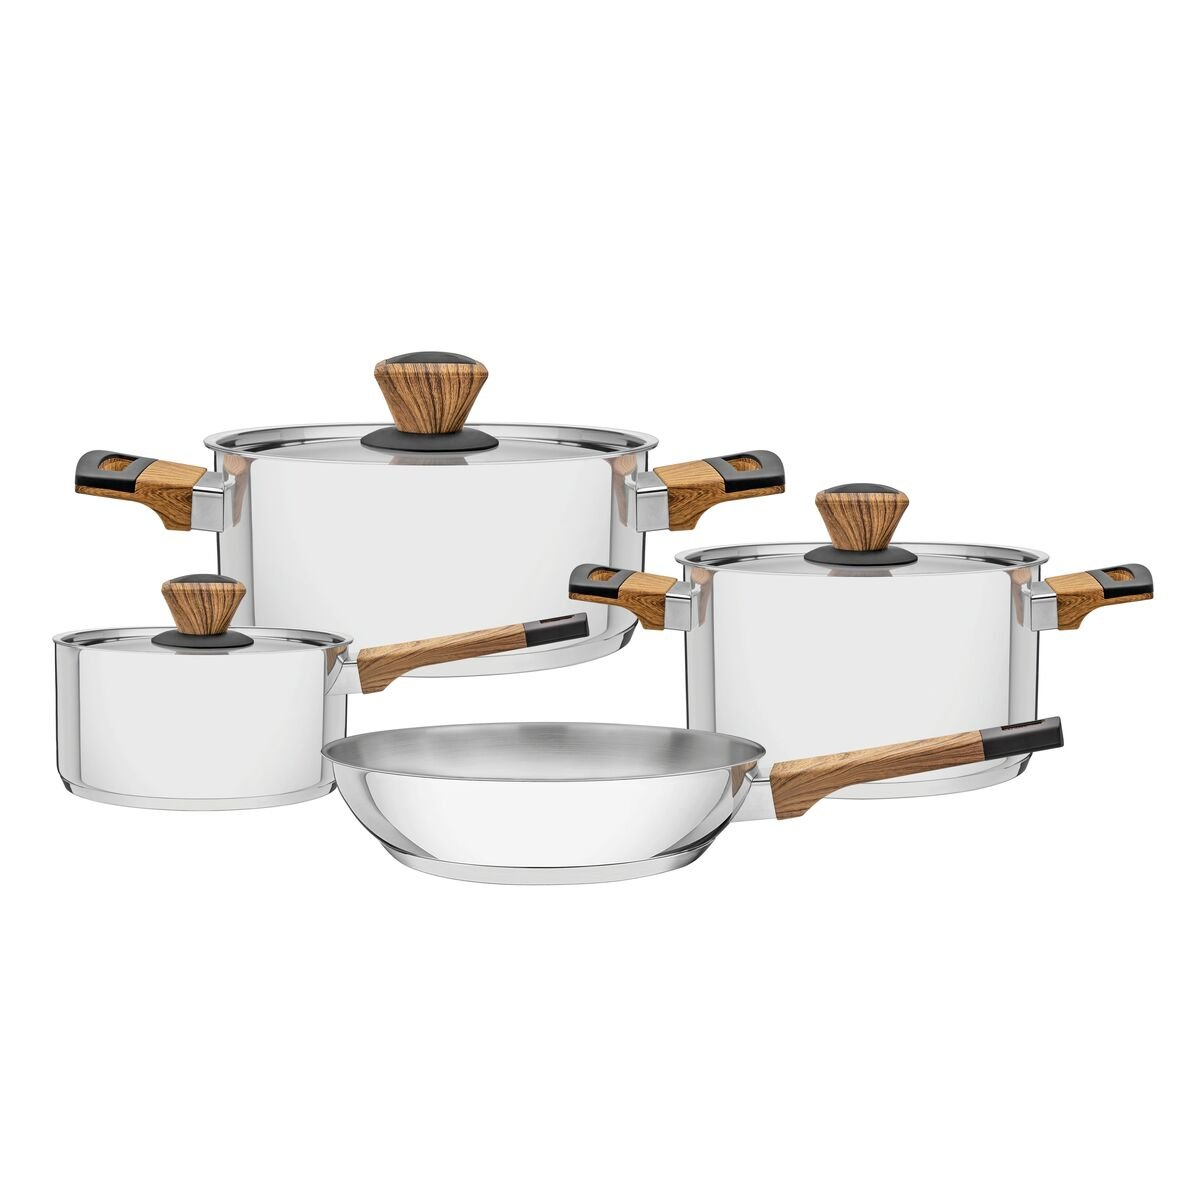 Tramontina Brava Bakelite stainless steel cookware set with tri-ply base and faux wood handles, 4 pc set